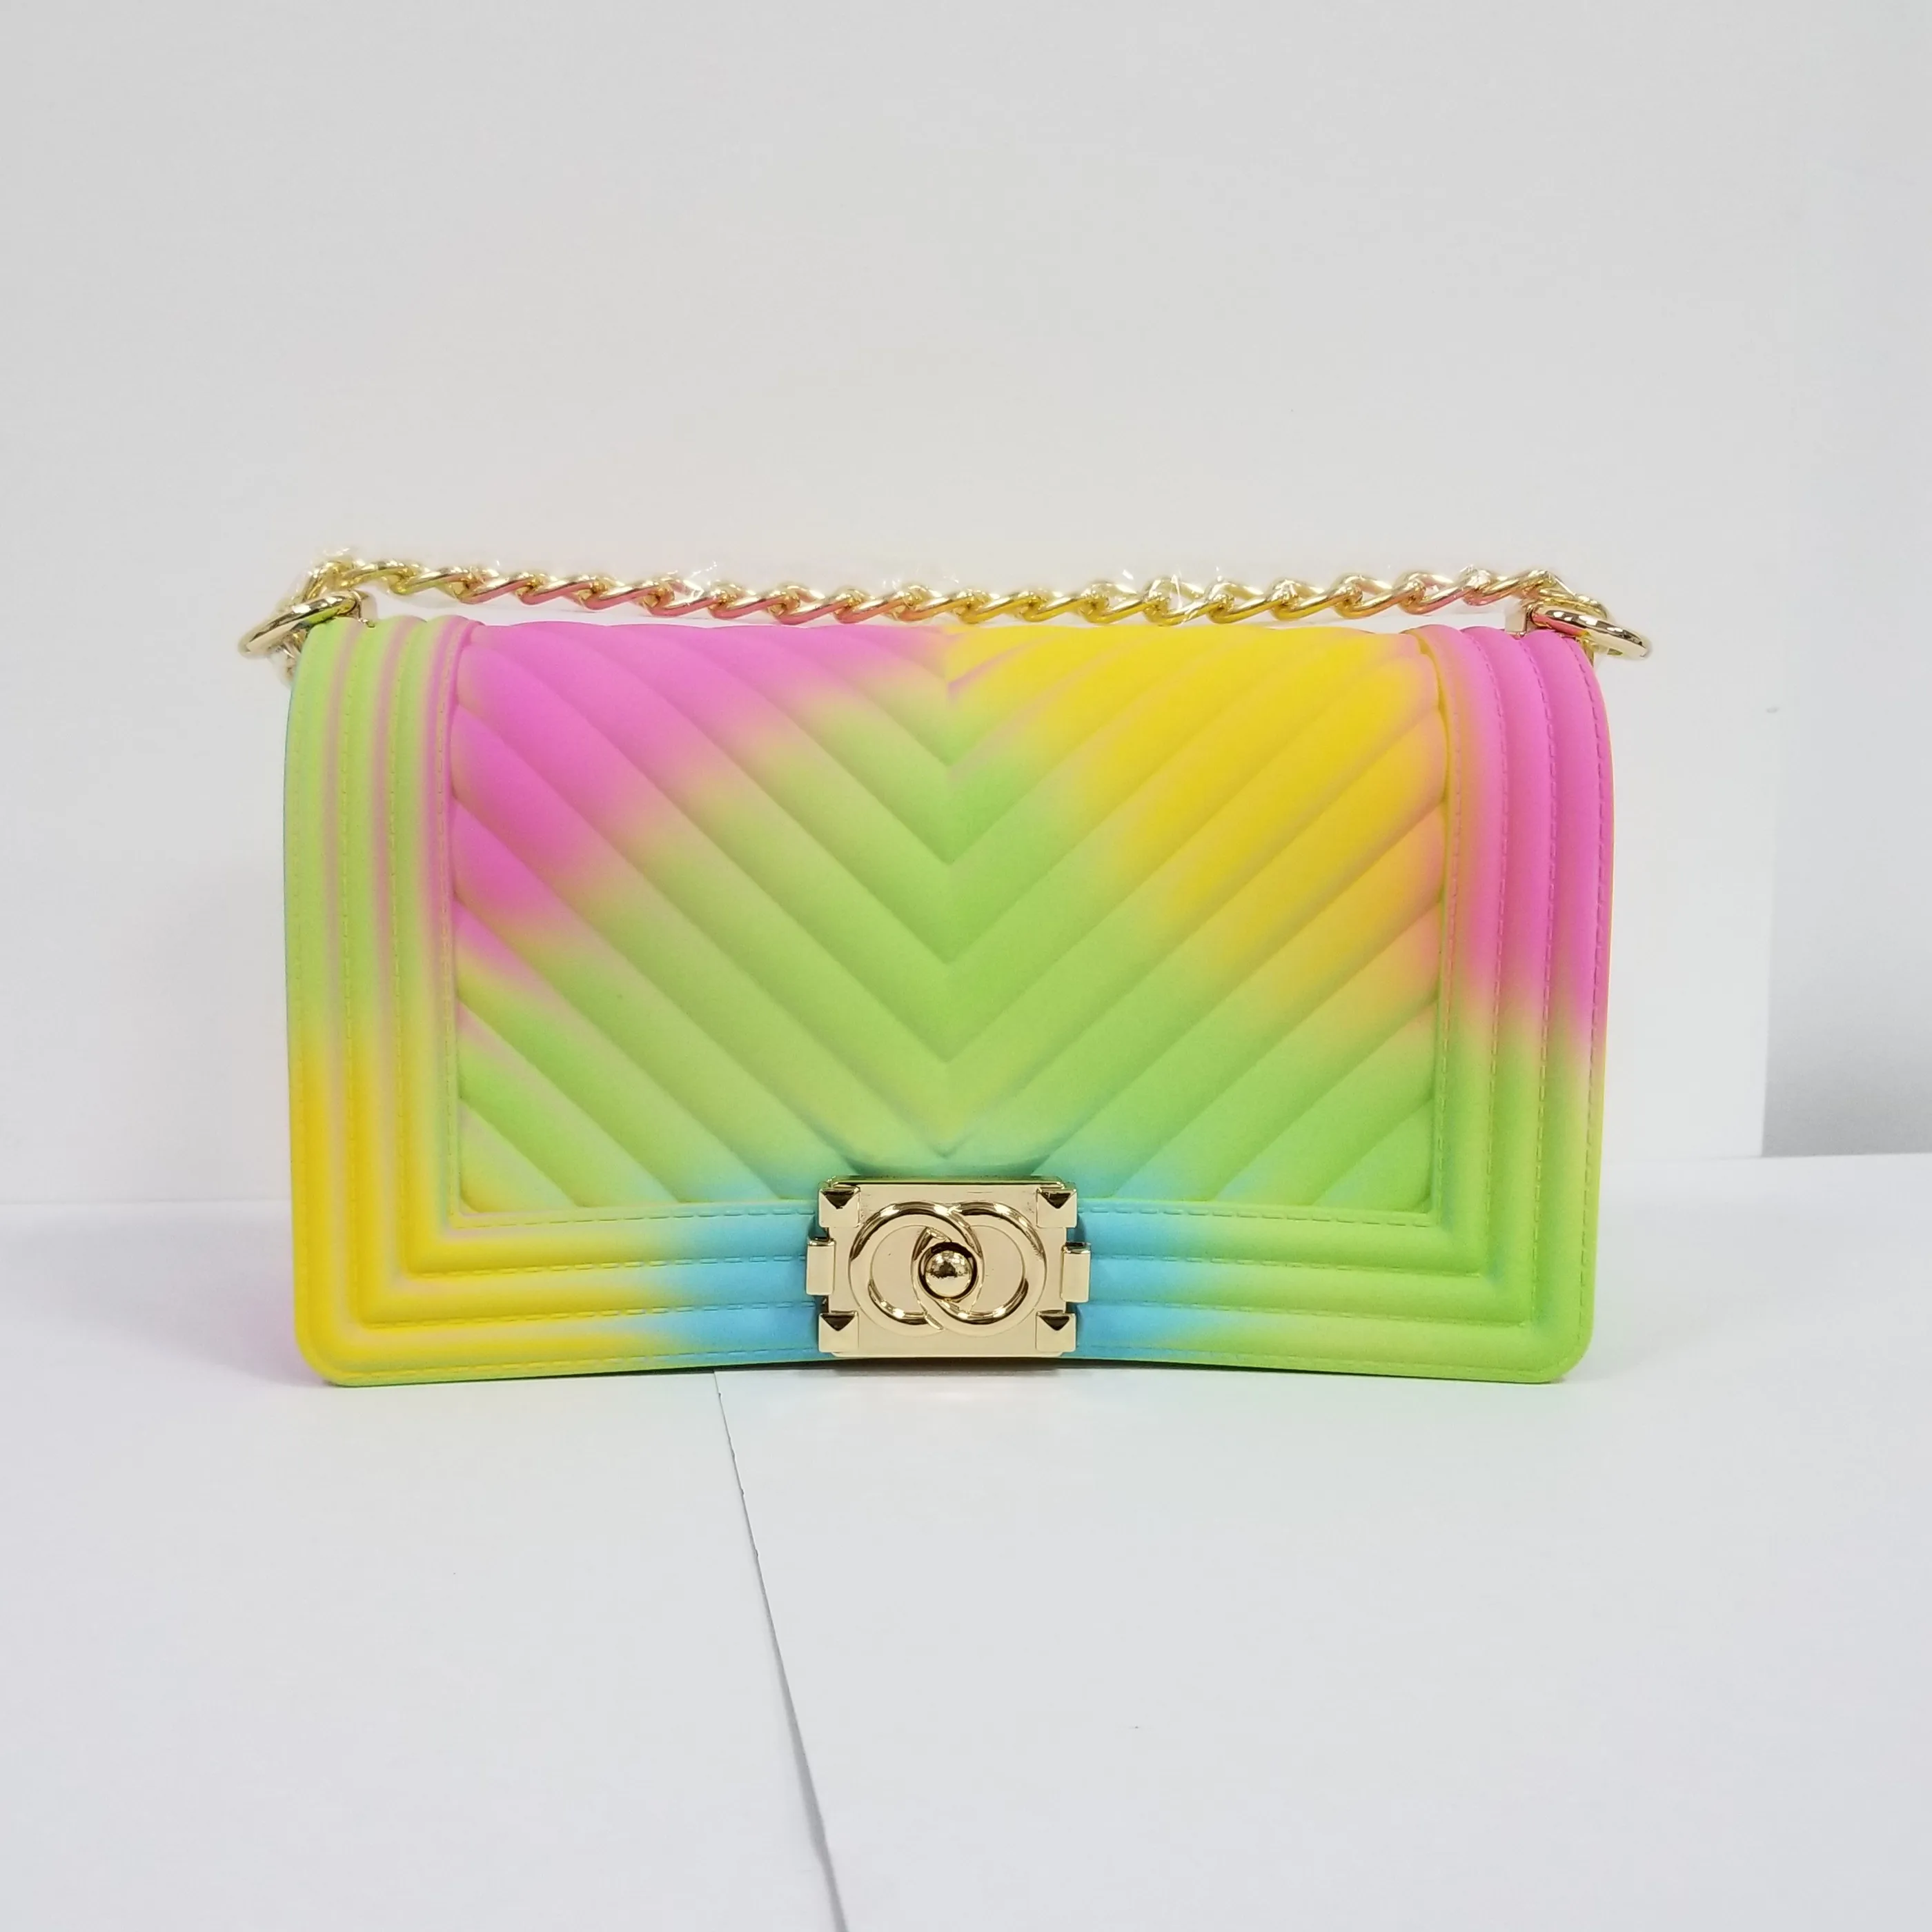 2020 Fashion Luxury Rainbow Purse Chain Lady Colorful Bags Candy Jelly ...